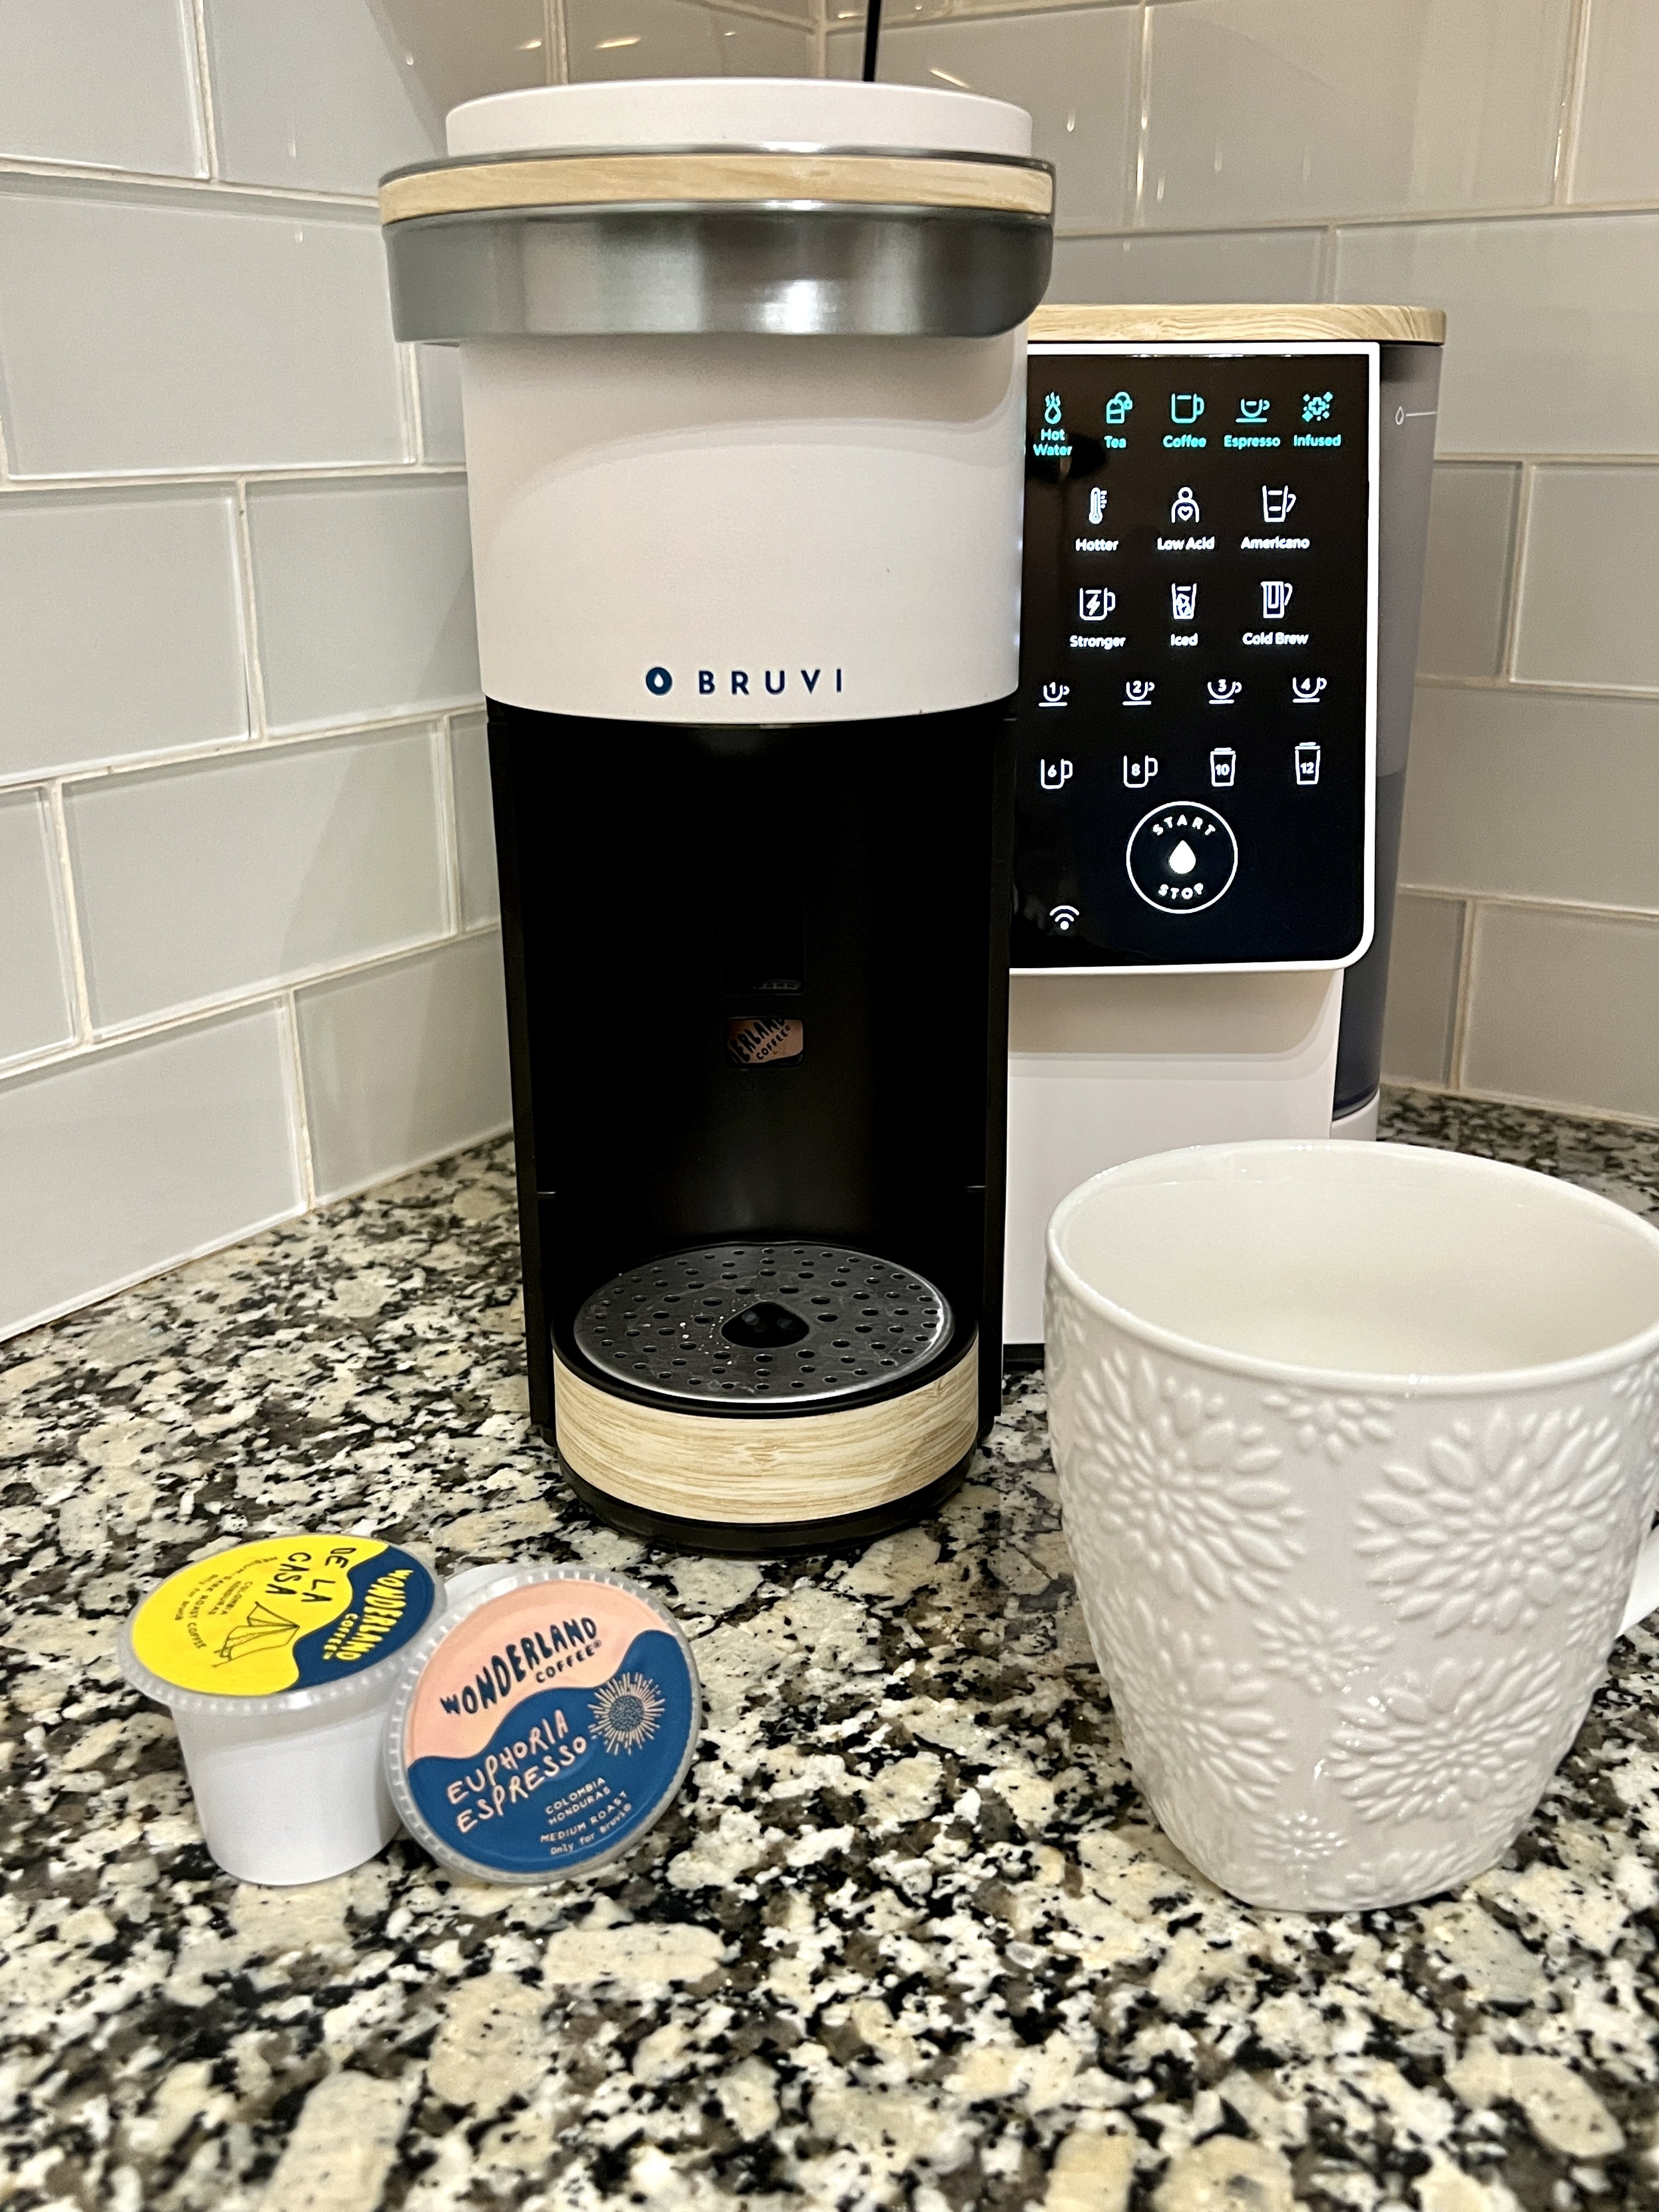 Bruvi Review: Is This Really the Best Single-Serve Coffee Maker?